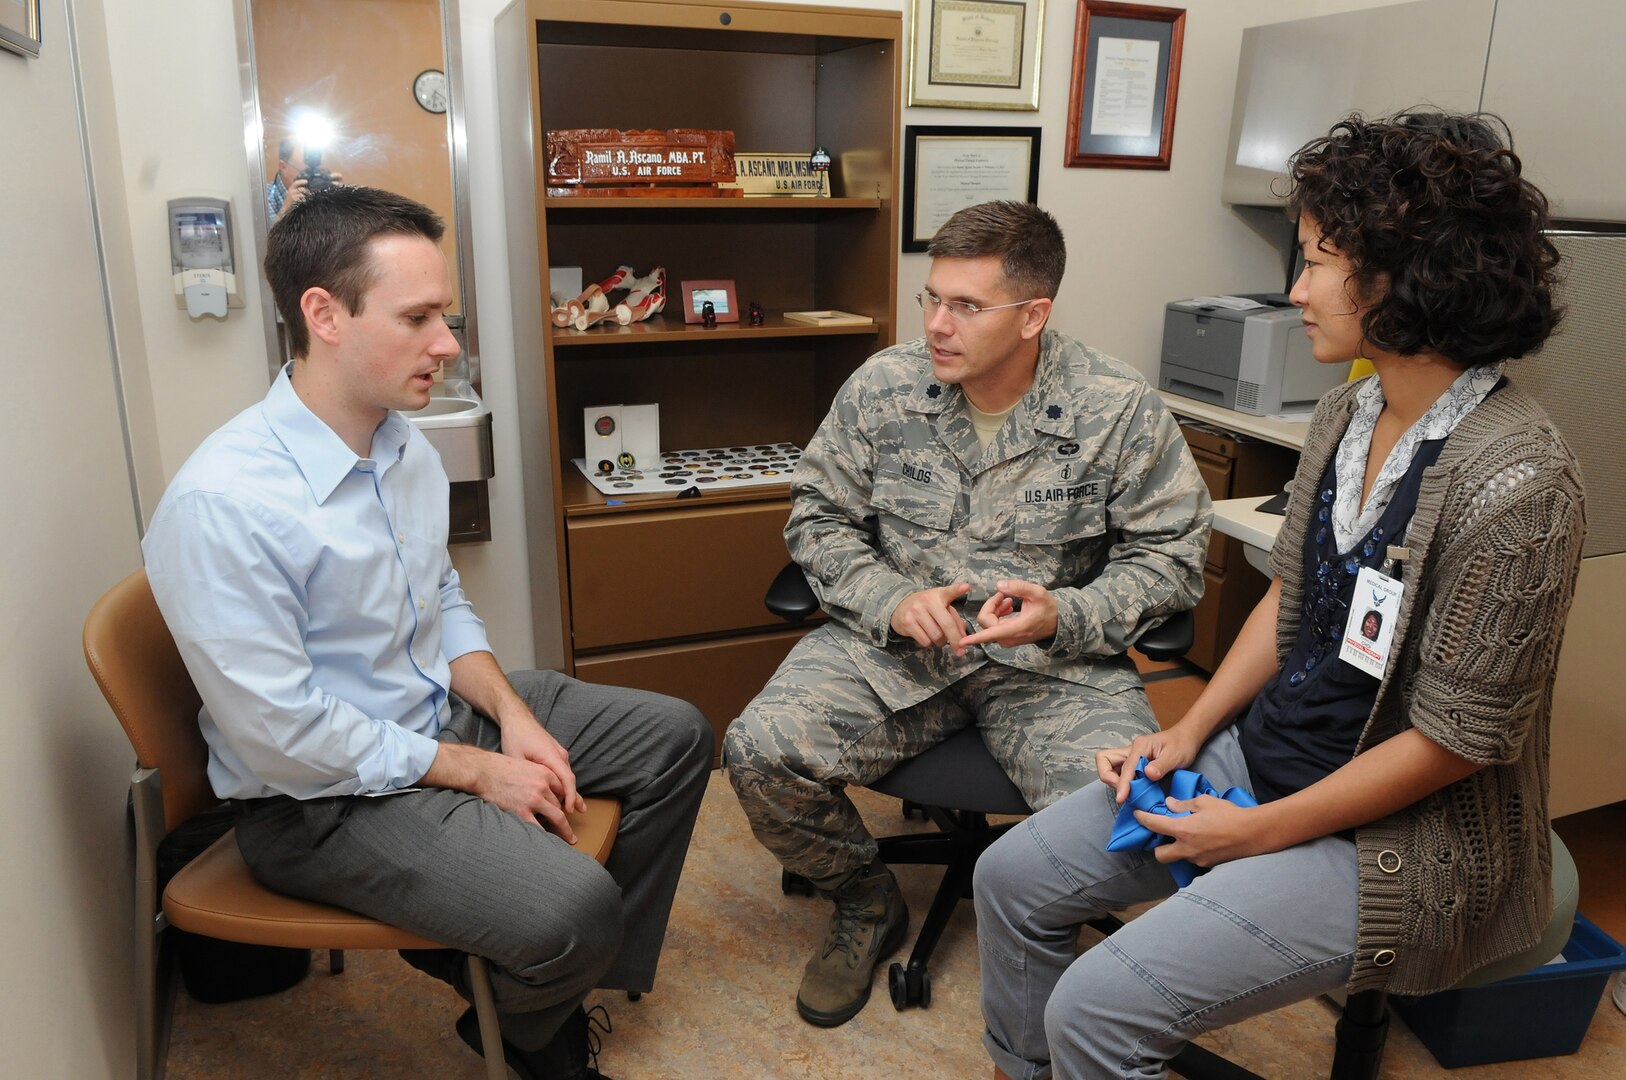 Air Force Lt. Col. John Childs, center, Principal  Investigator on a study of knee osteoarthritis, meets with physical therapists Brett Neilson  and Harmony Choi, at the Physical Therapy Clinic at Randolph Air Force Base, Texas.  The physical therapists are participating in the study of knee osteoarthritis. (U.S. Air Force photo/David Terry)